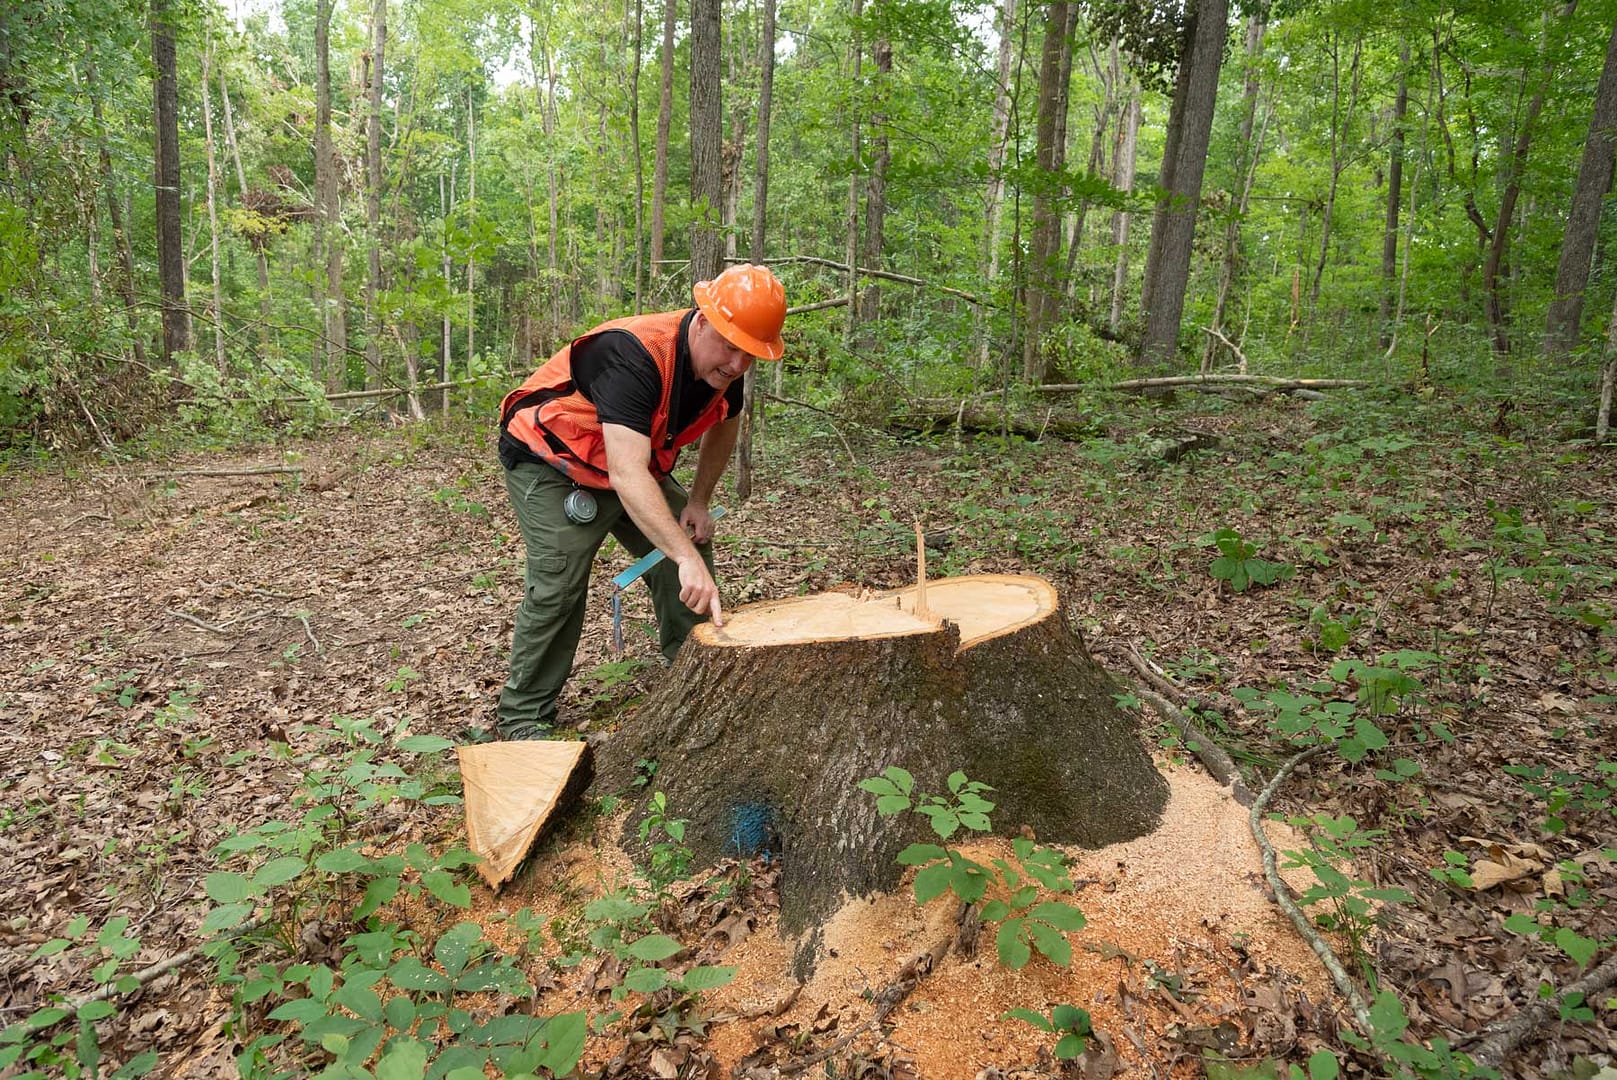 James McDaniel examining a recently cut tree stump in the forst